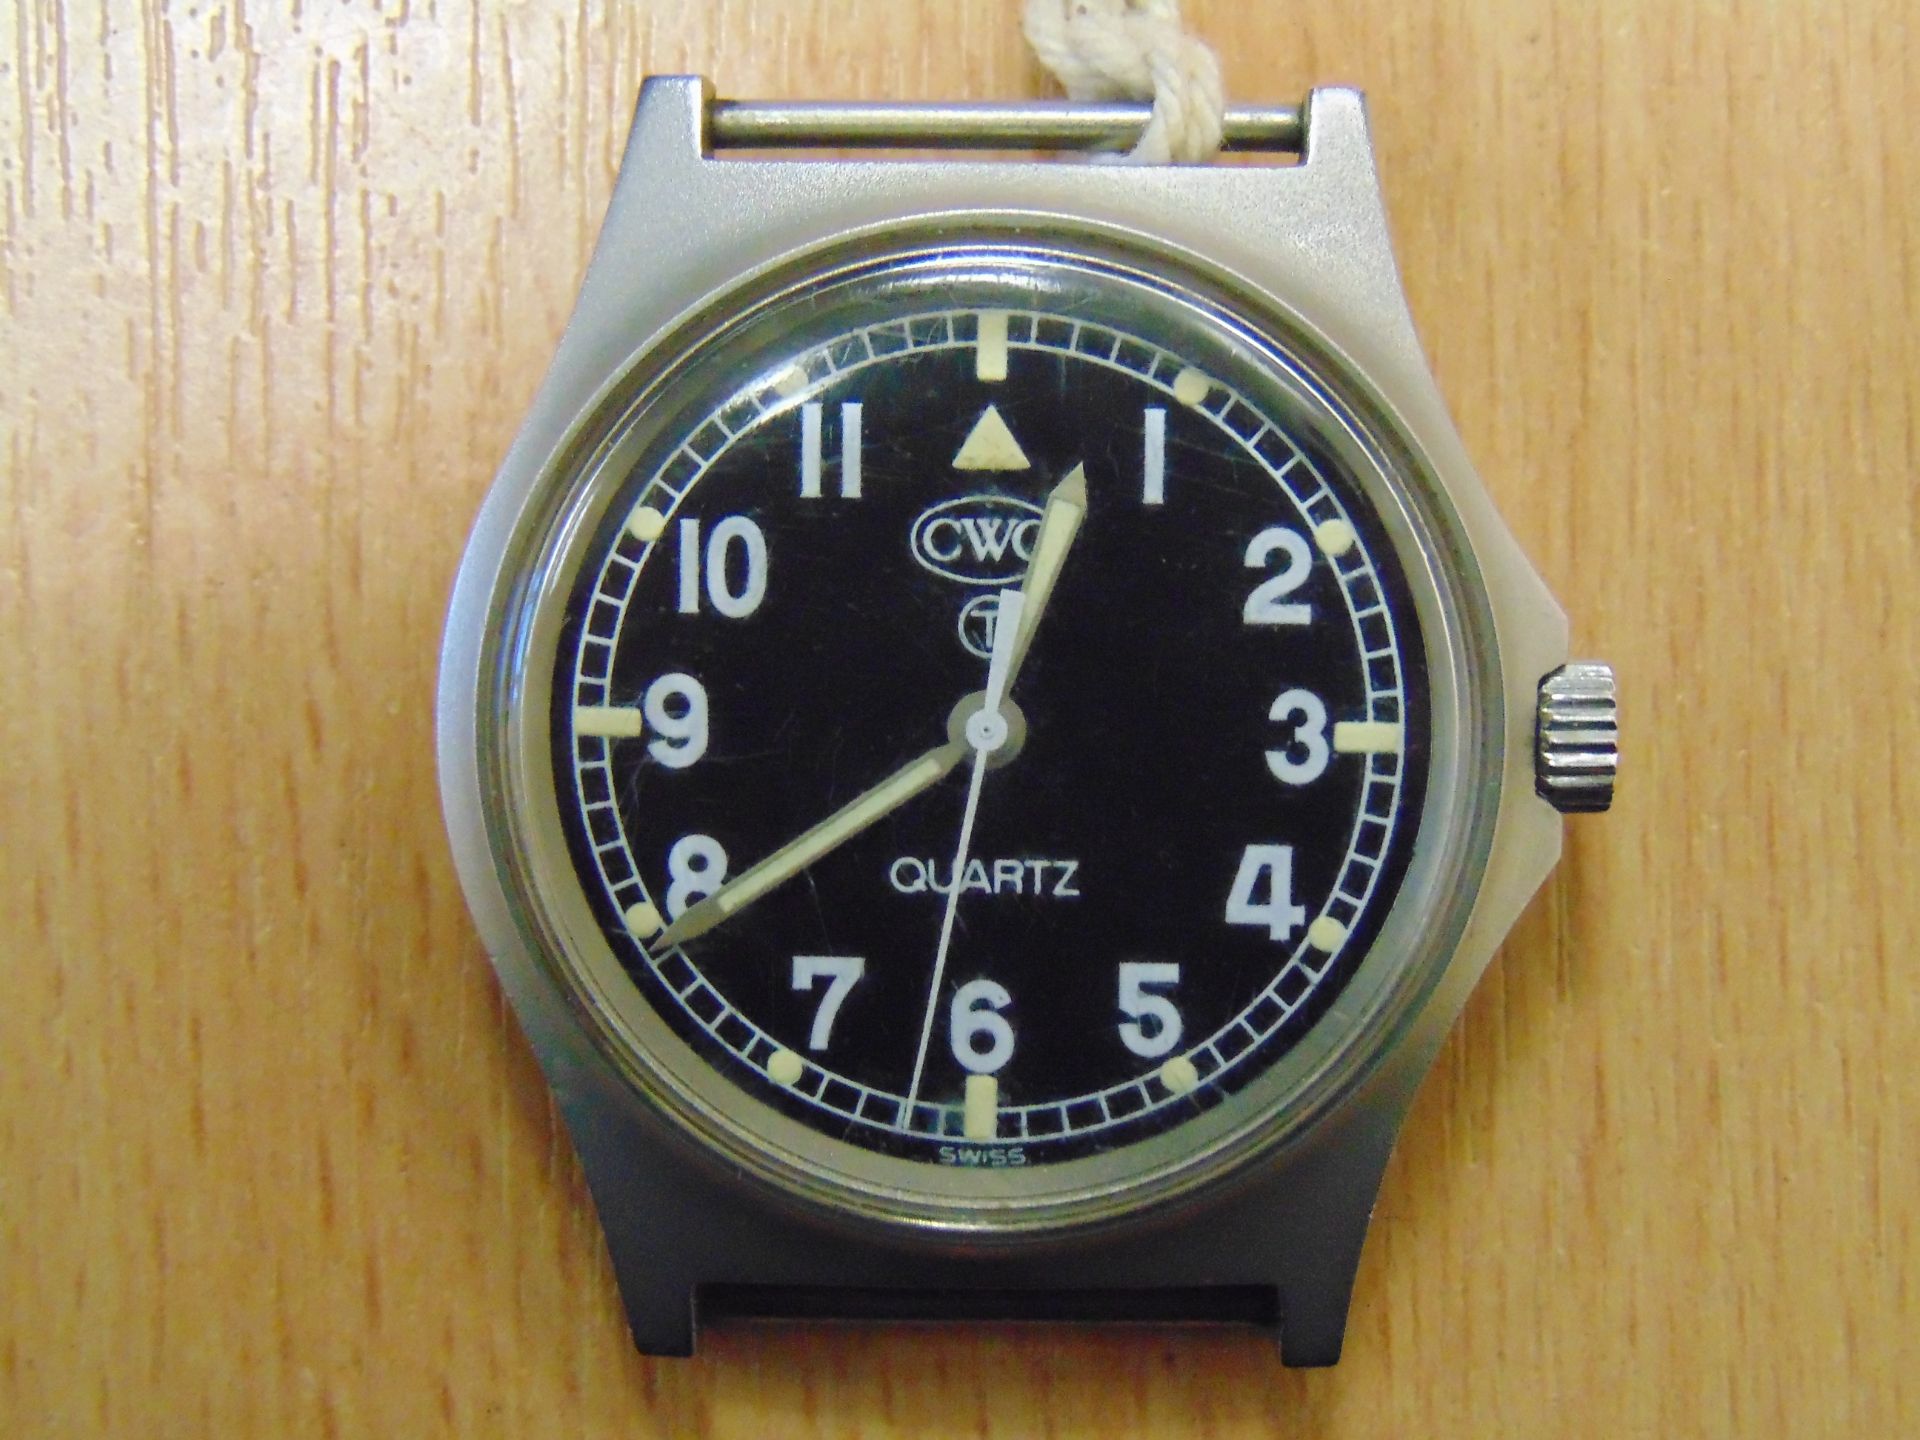 RARE CWC FAT BOY 0552 RM/ NAVY ISSUE SERVICE WATCH DATE 1985 - Image 2 of 4